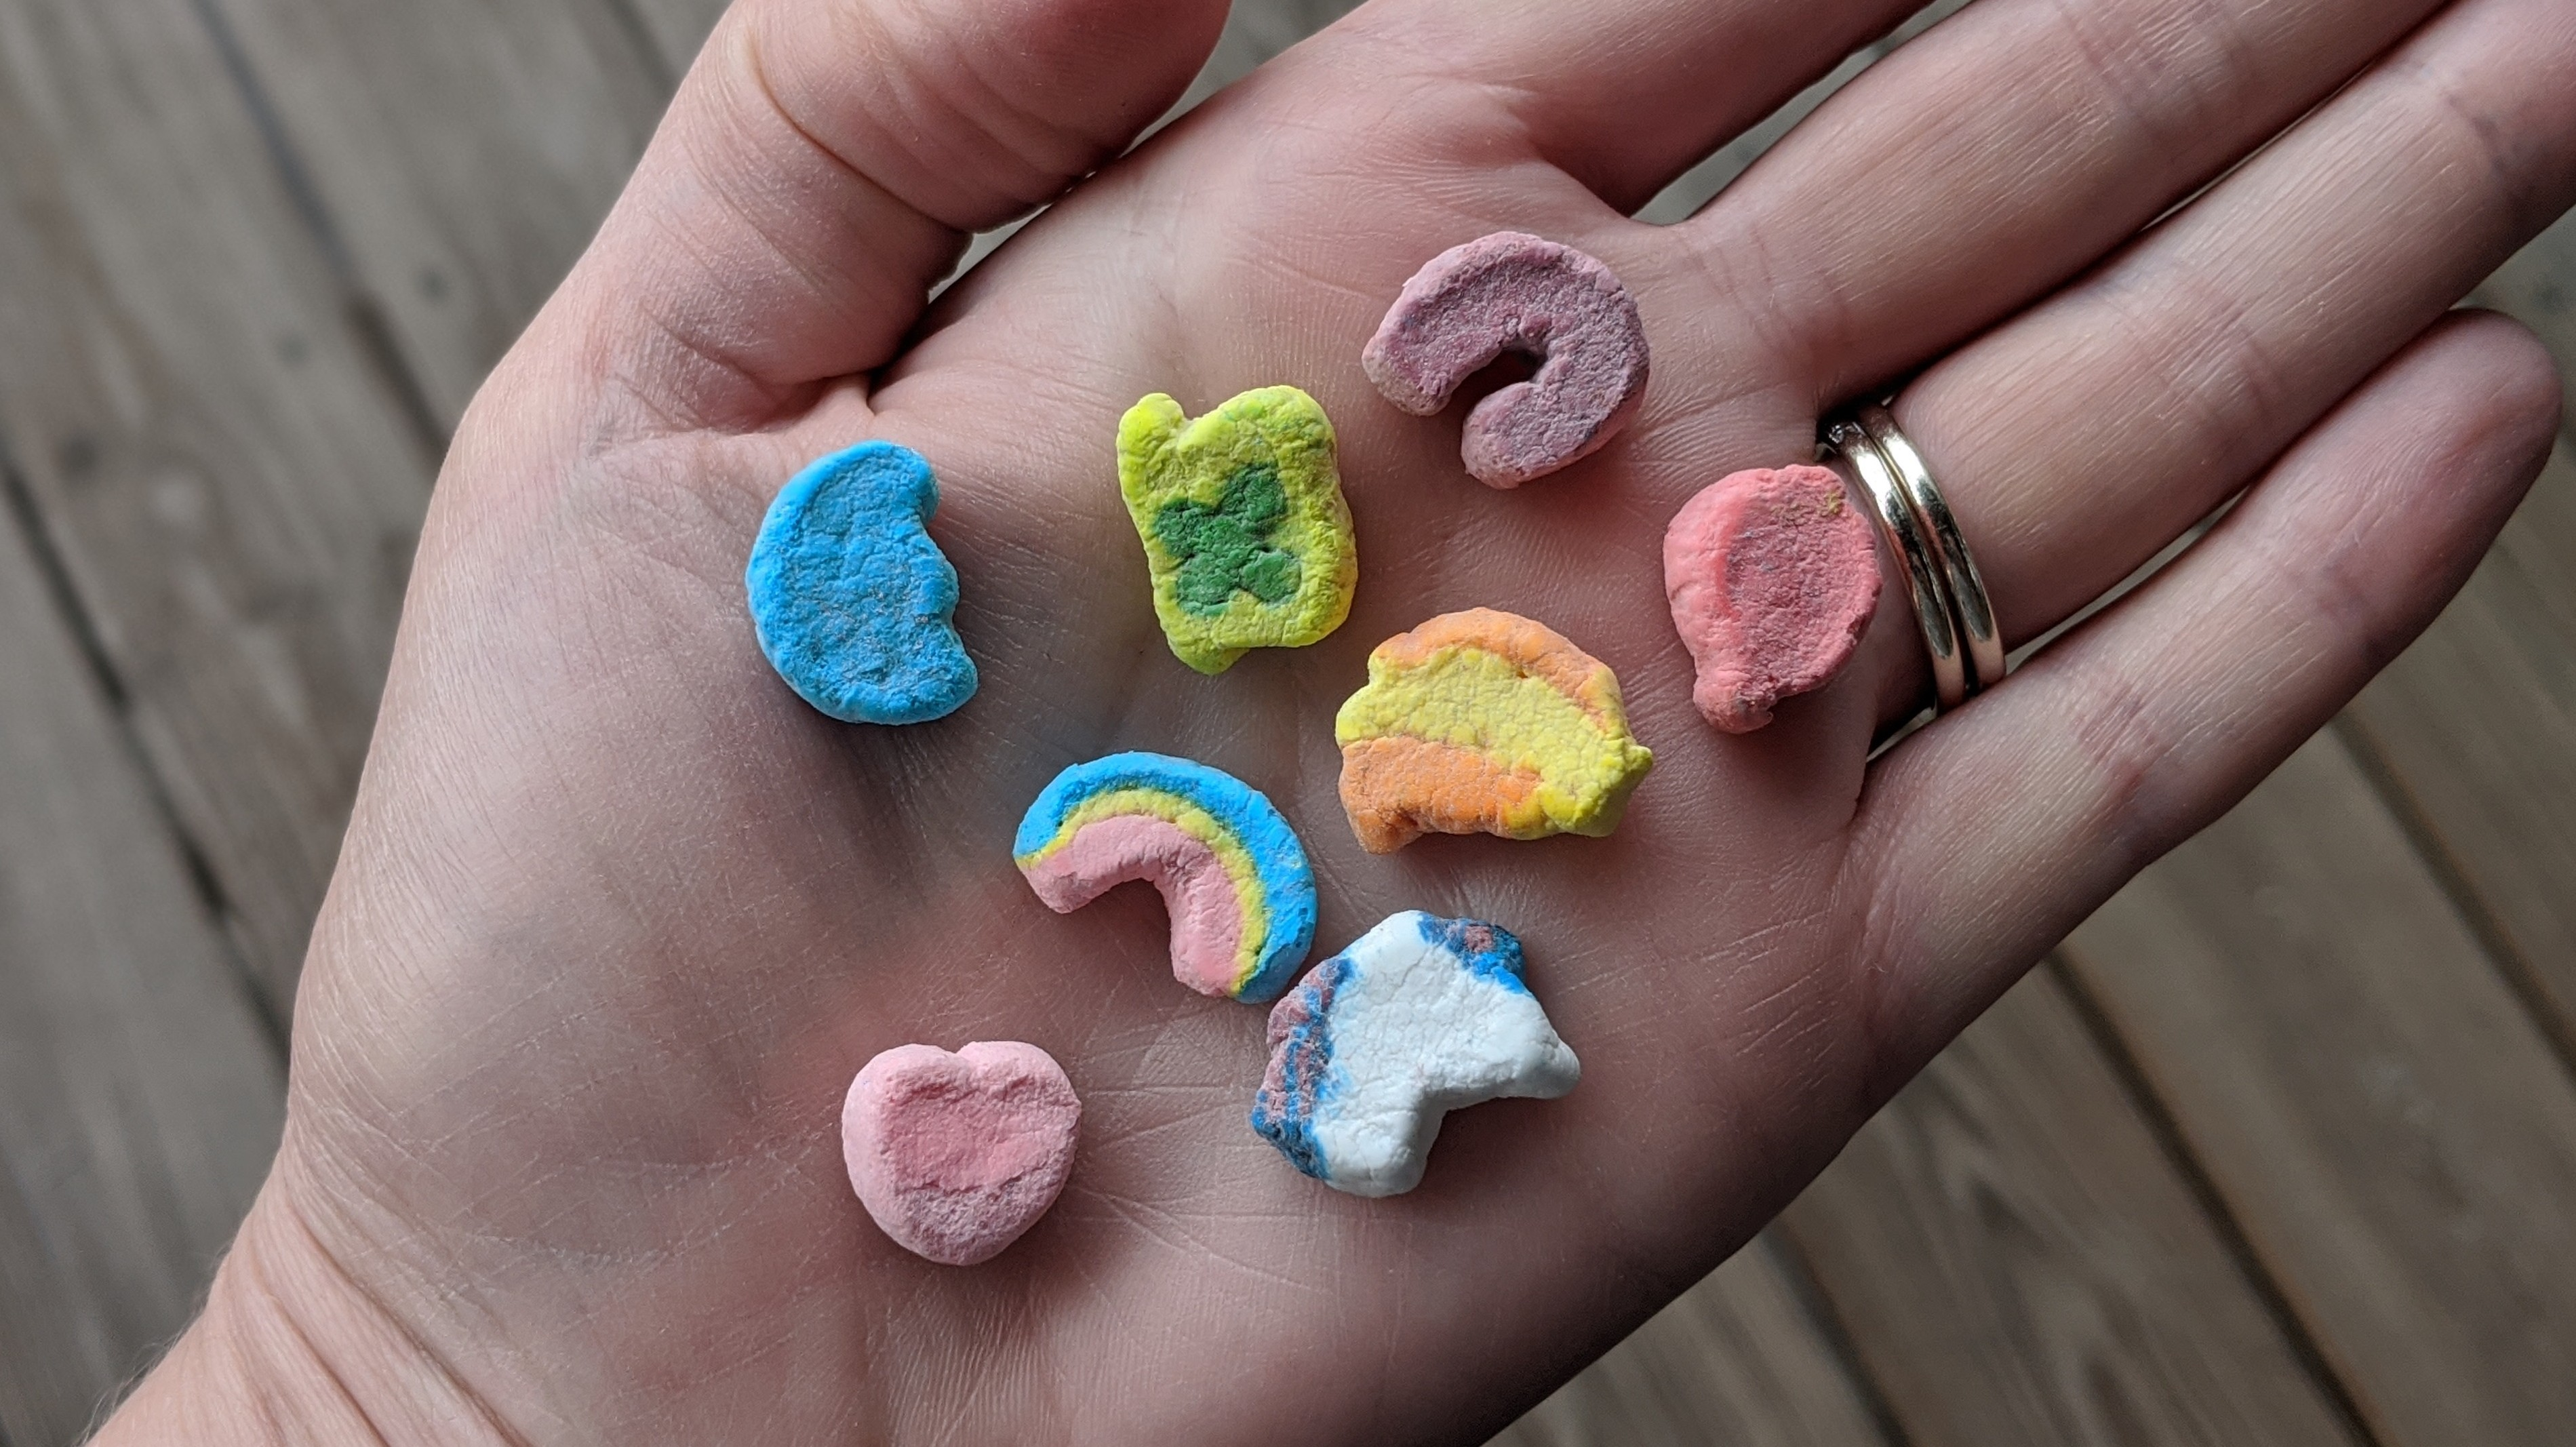 Eight Lucky Charms cereal marshmallows of every variety spread out on an open palm